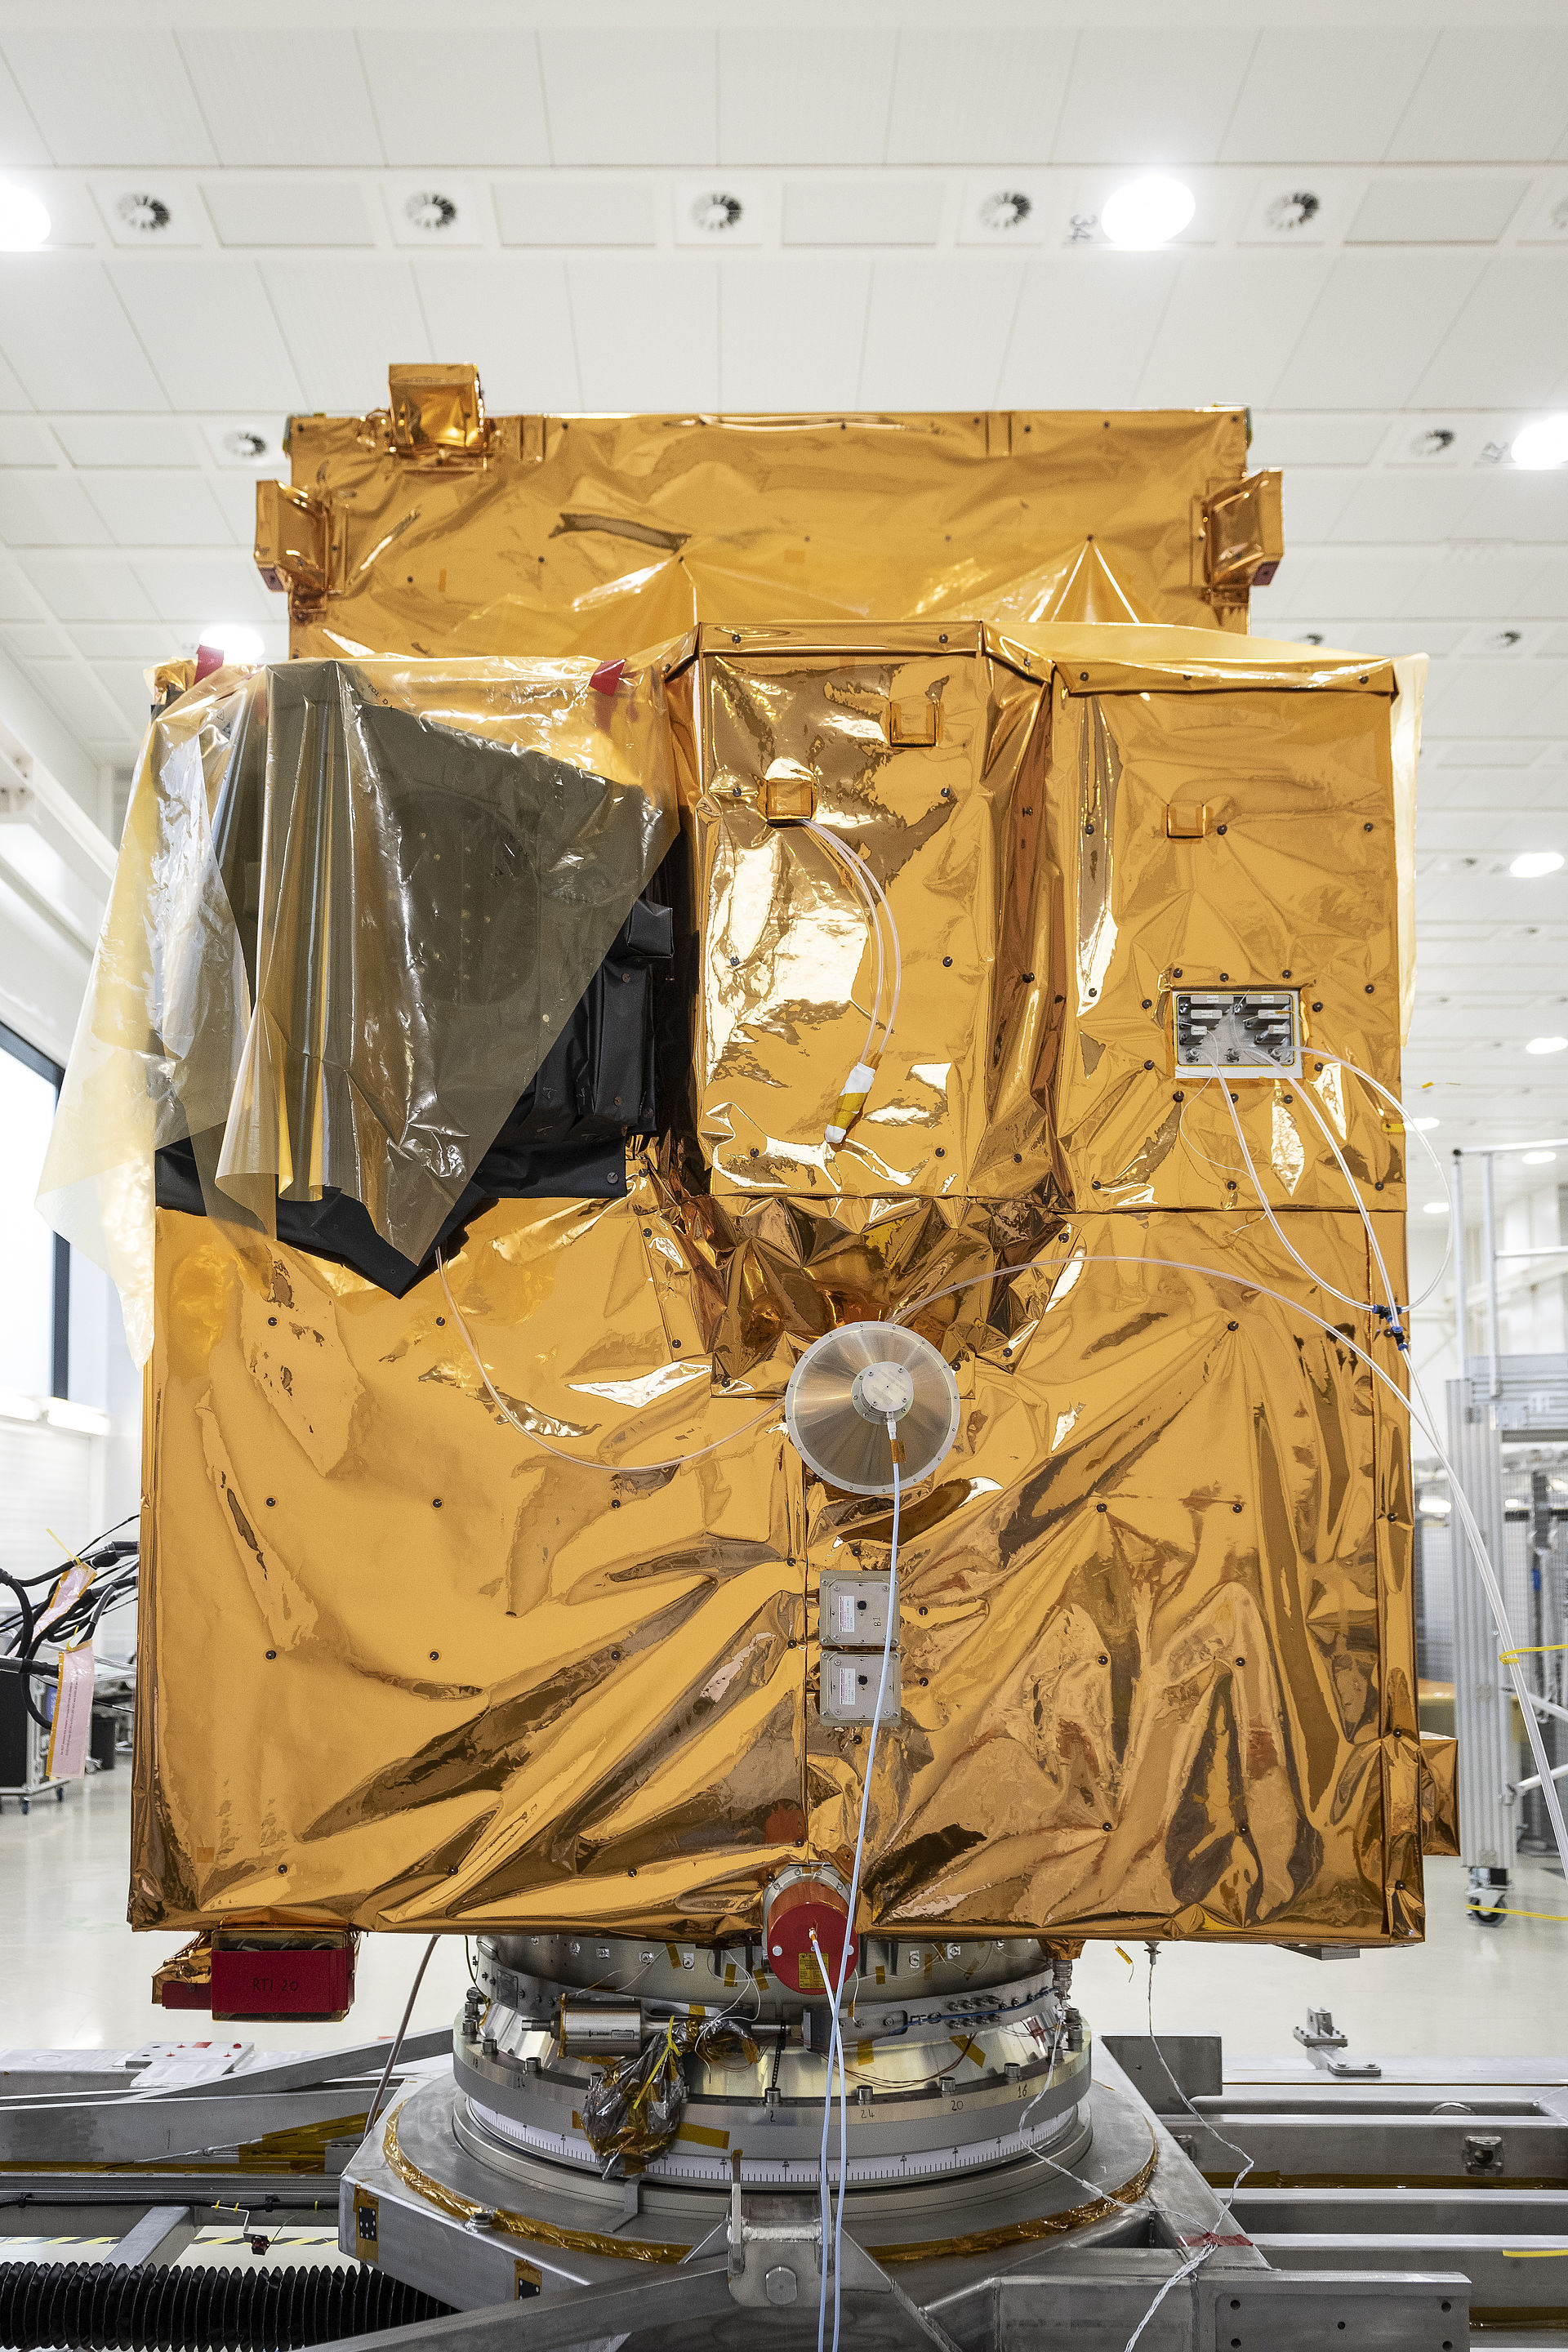 "A satellite from Germany launches a new era in Earth observation"